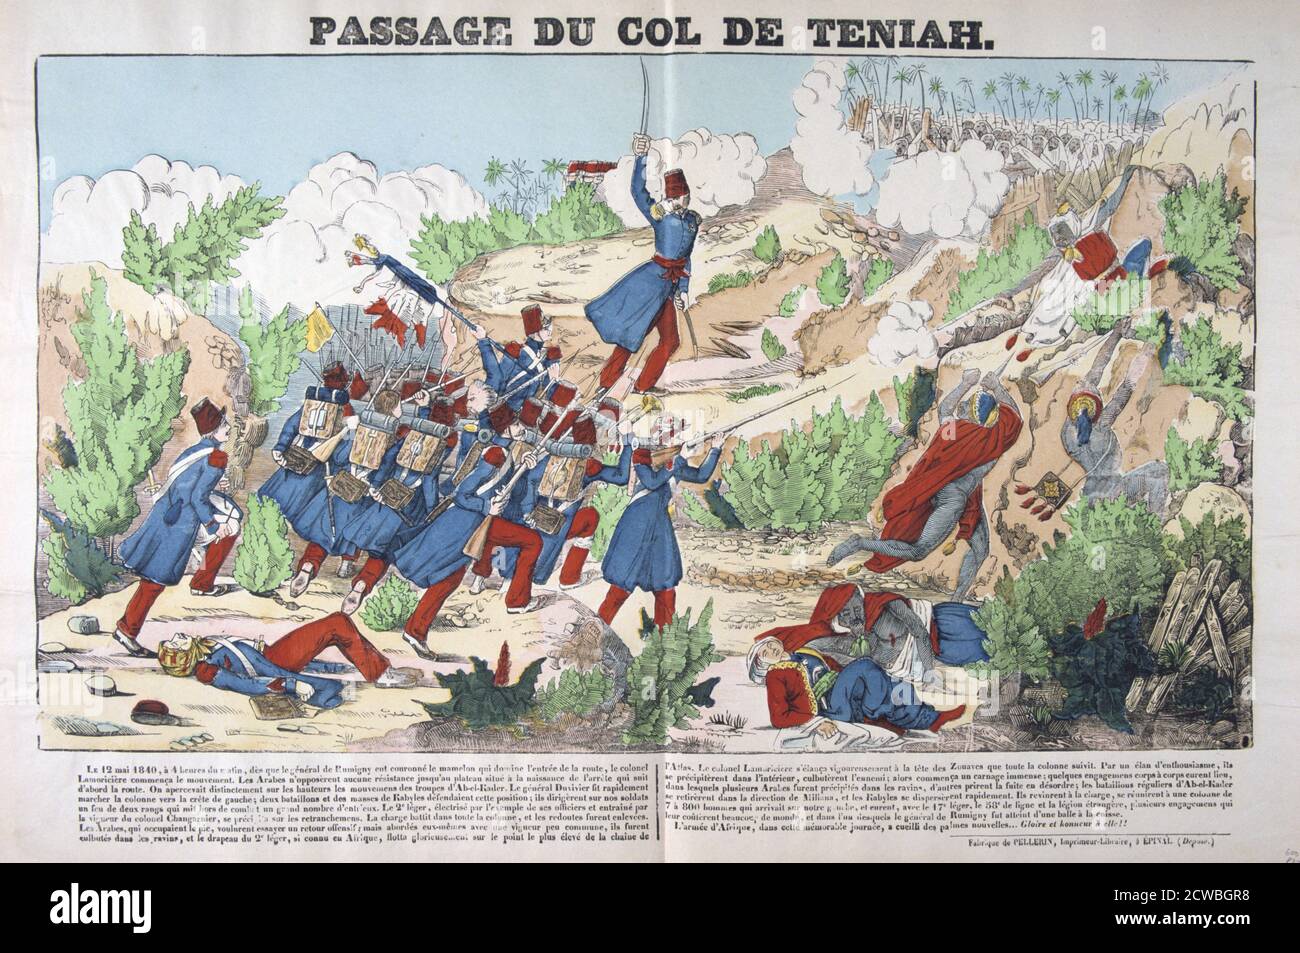 Passage du Col Teniah, conquest of Algeria, 12th May 1840, France 19th century. Colour Lithograph. Private collection. Stock Photo